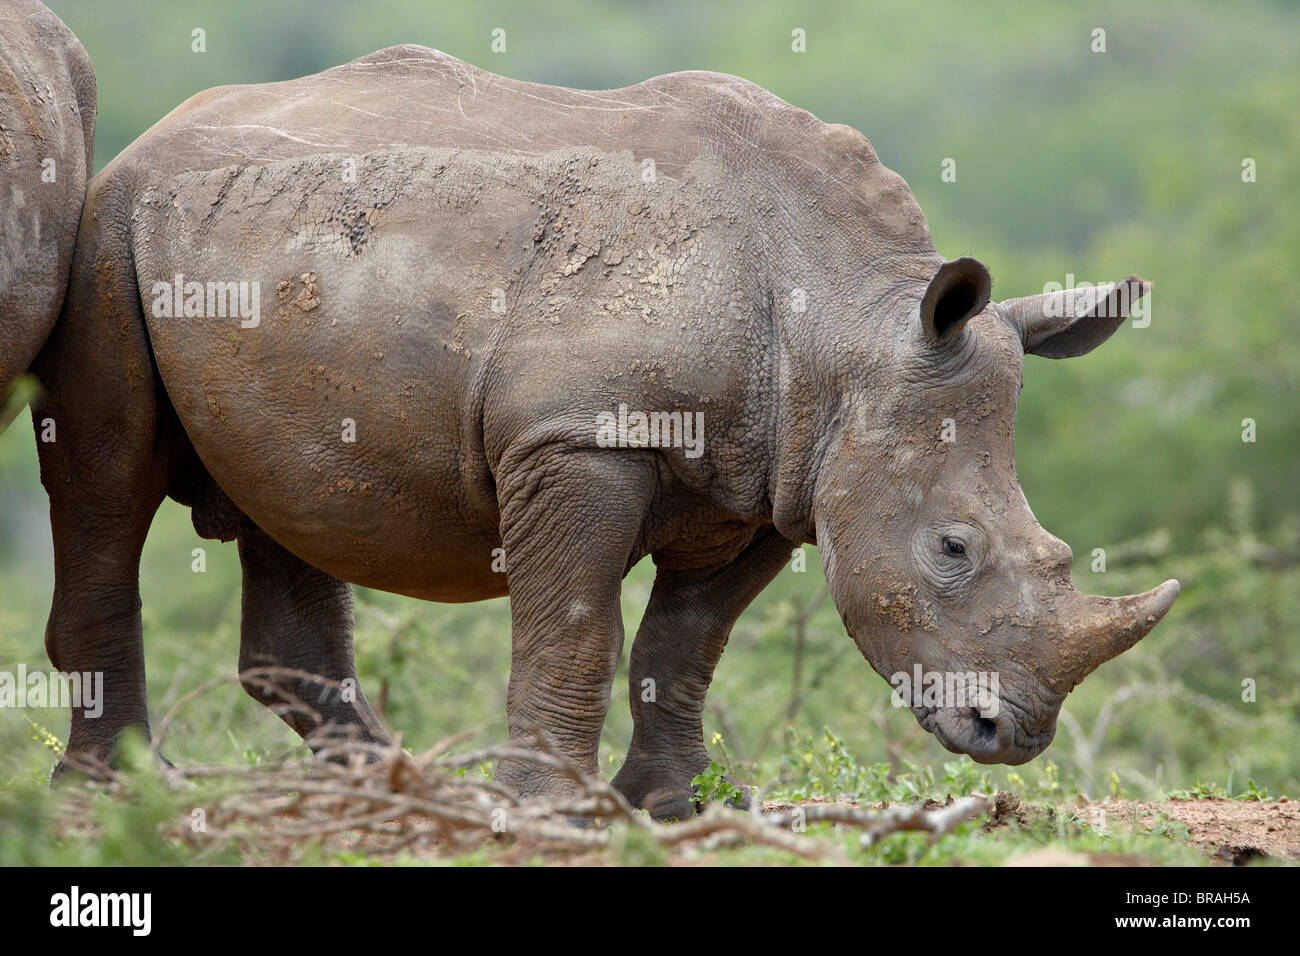 Young White Rhinoceros (Ceratotherium simum), Hluhluwe Game Reserve, South Africa, Africa Stock Photo